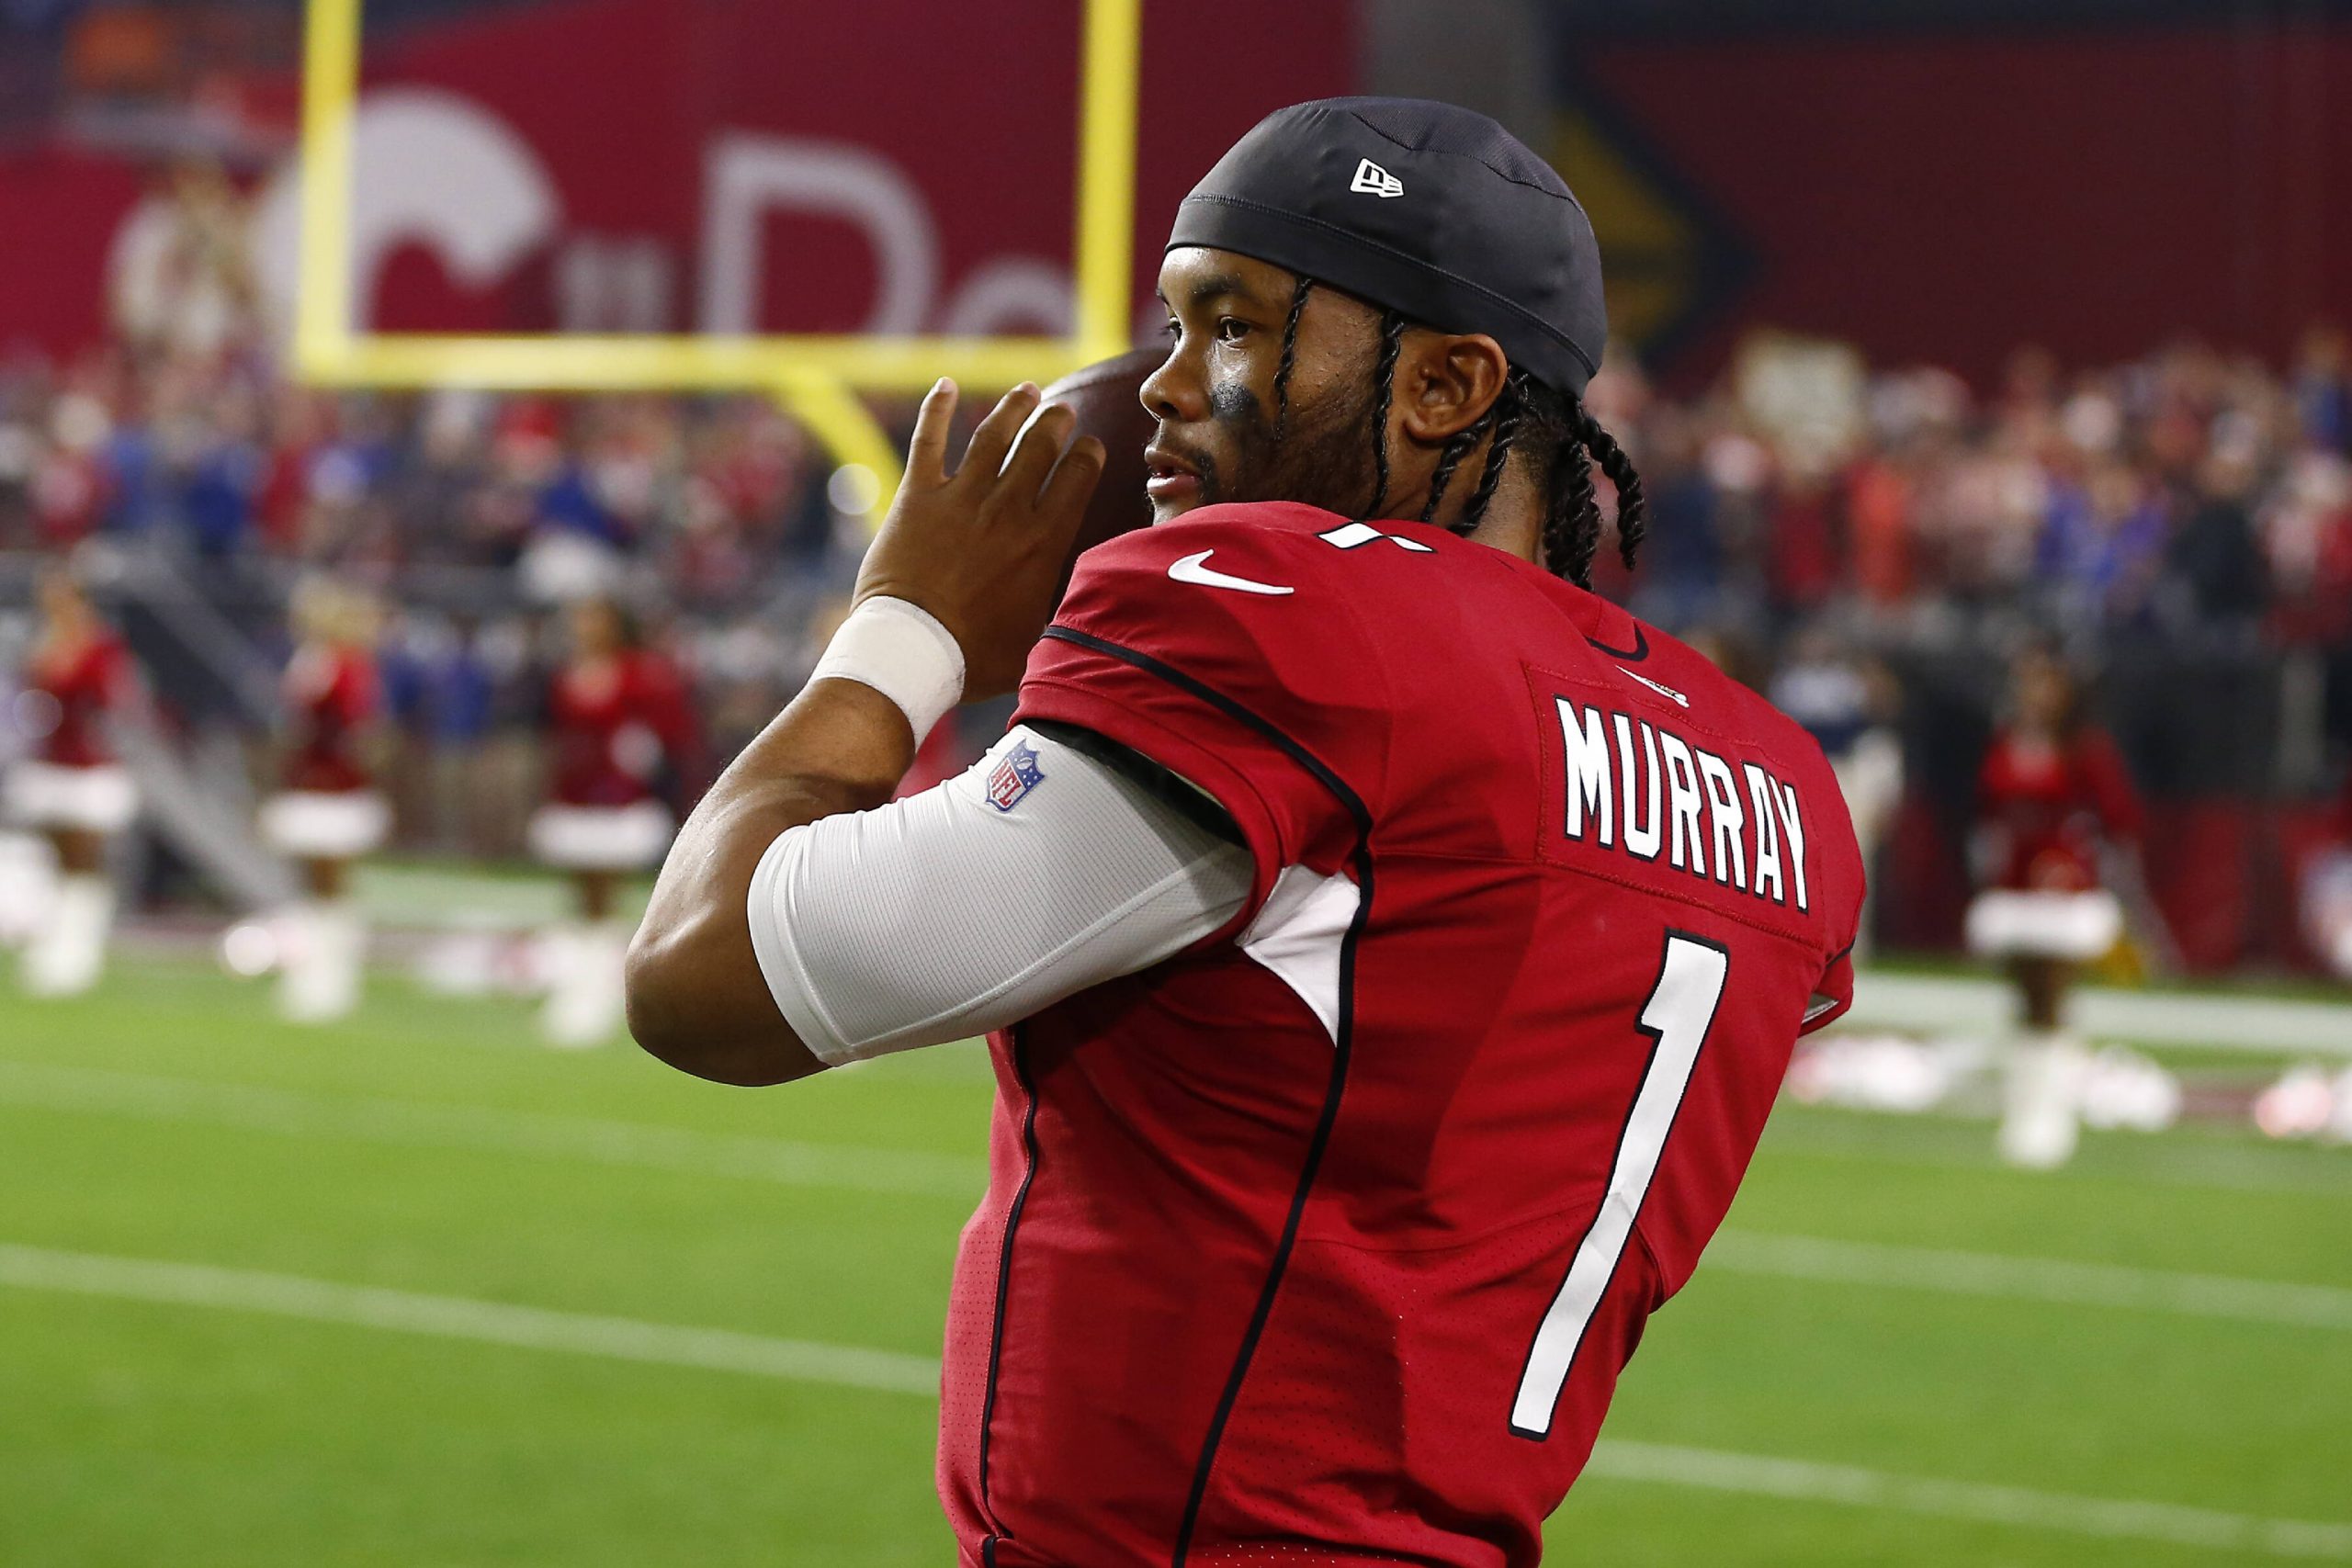 GLENDALE, AZ - DECEMBER 25: Arizona Cardinals Quarterback Kyler Murray 1 warms up prior to the start of an NFL, American Football Herren, USA game between the Indianapolis Colts and the Arizona Cardinals on December 25, 2021 at State Farm Stadium, in Glendale AZ. Photo by Jeffrey Brown/Icon Sportswire NFL: DEC 25 Colts at Cardinals Icon12252021059